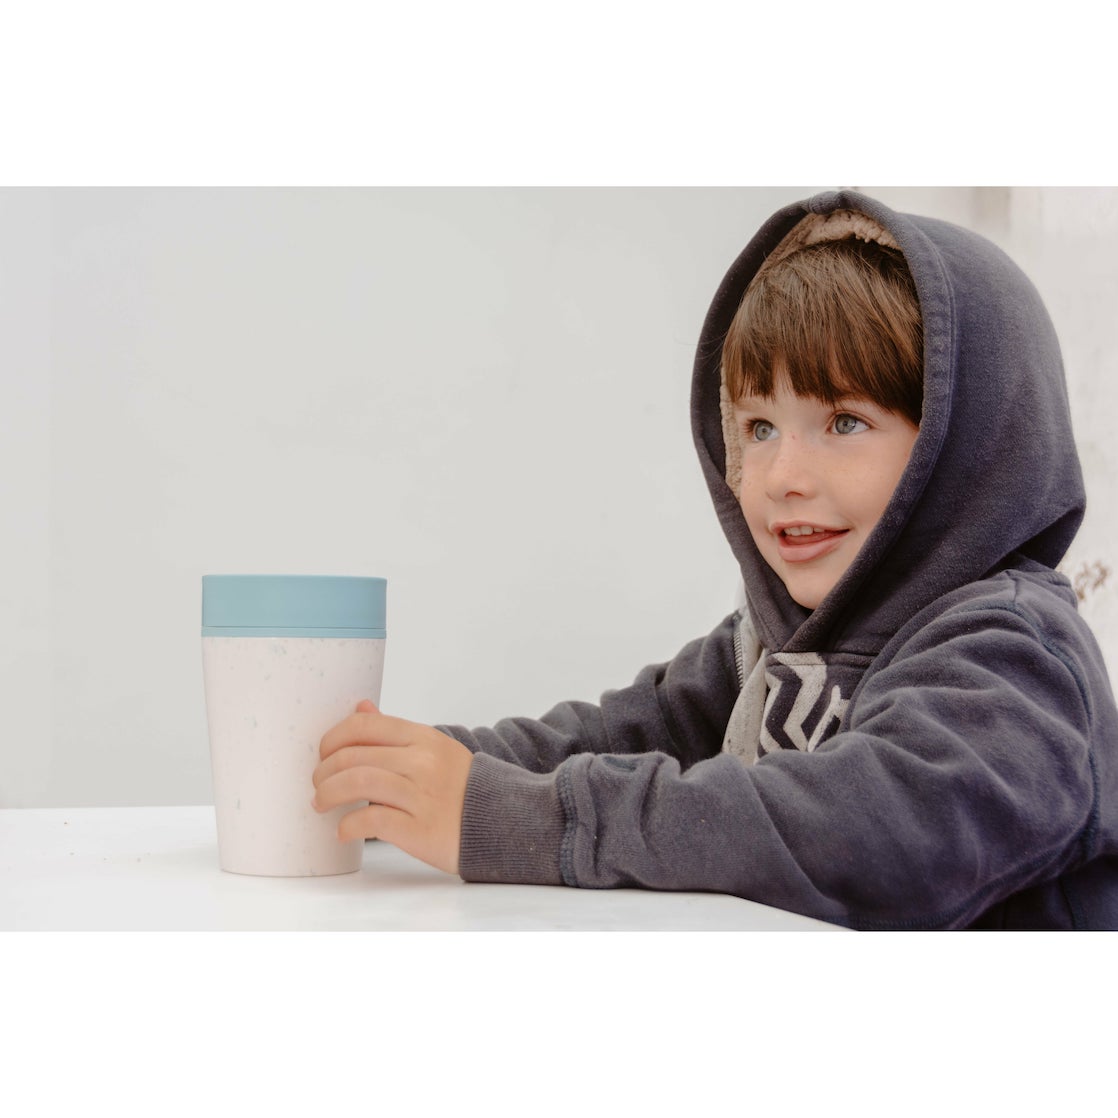 Reusable coffee cup lifestyle with child